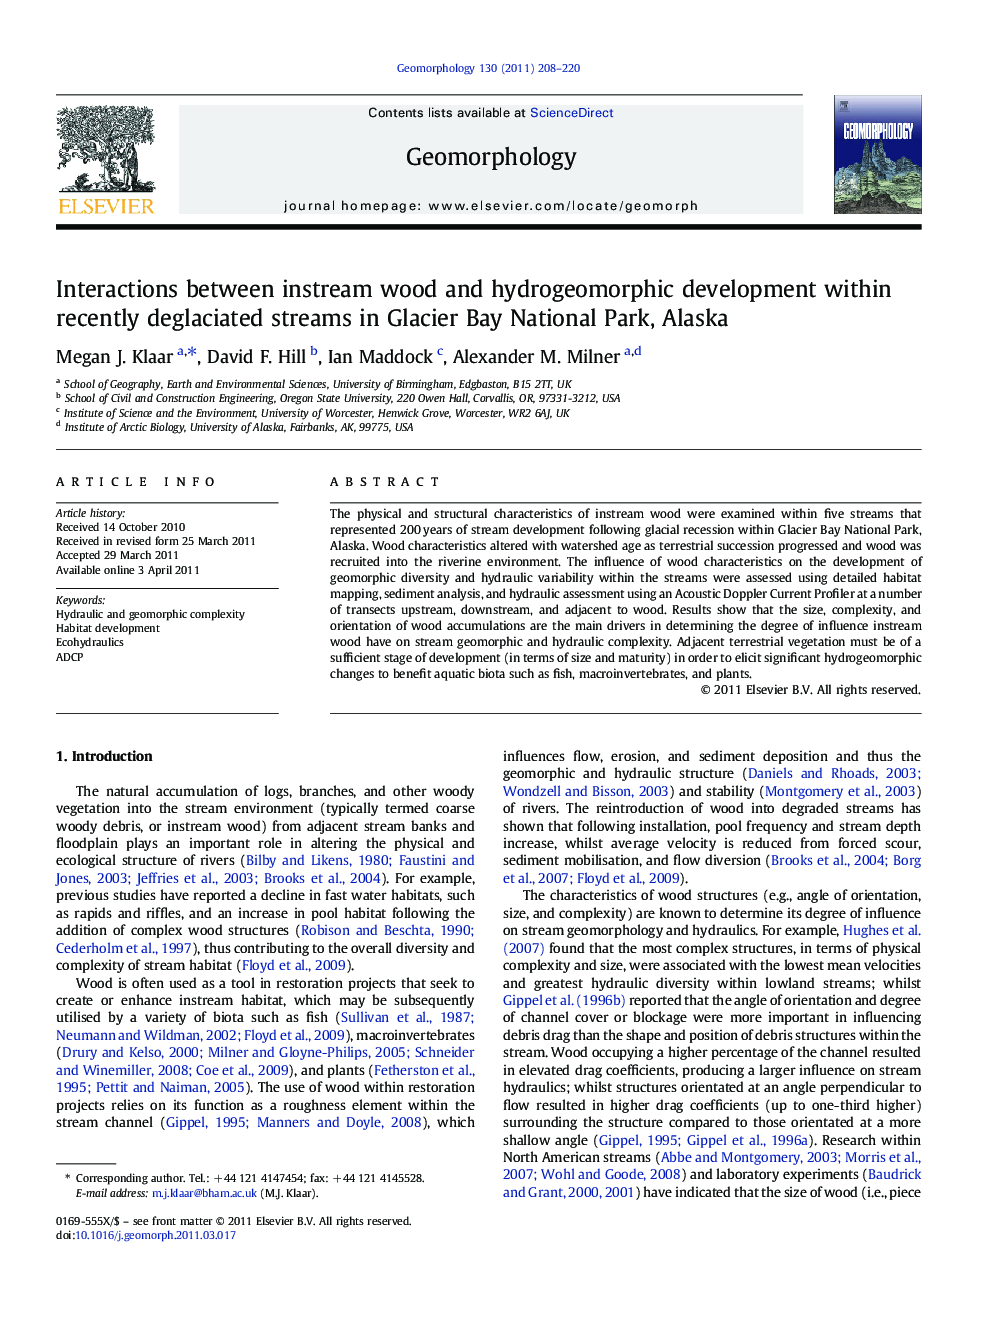 Interactions between instream wood and hydrogeomorphic development within recently deglaciated streams in Glacier Bay National Park, Alaska